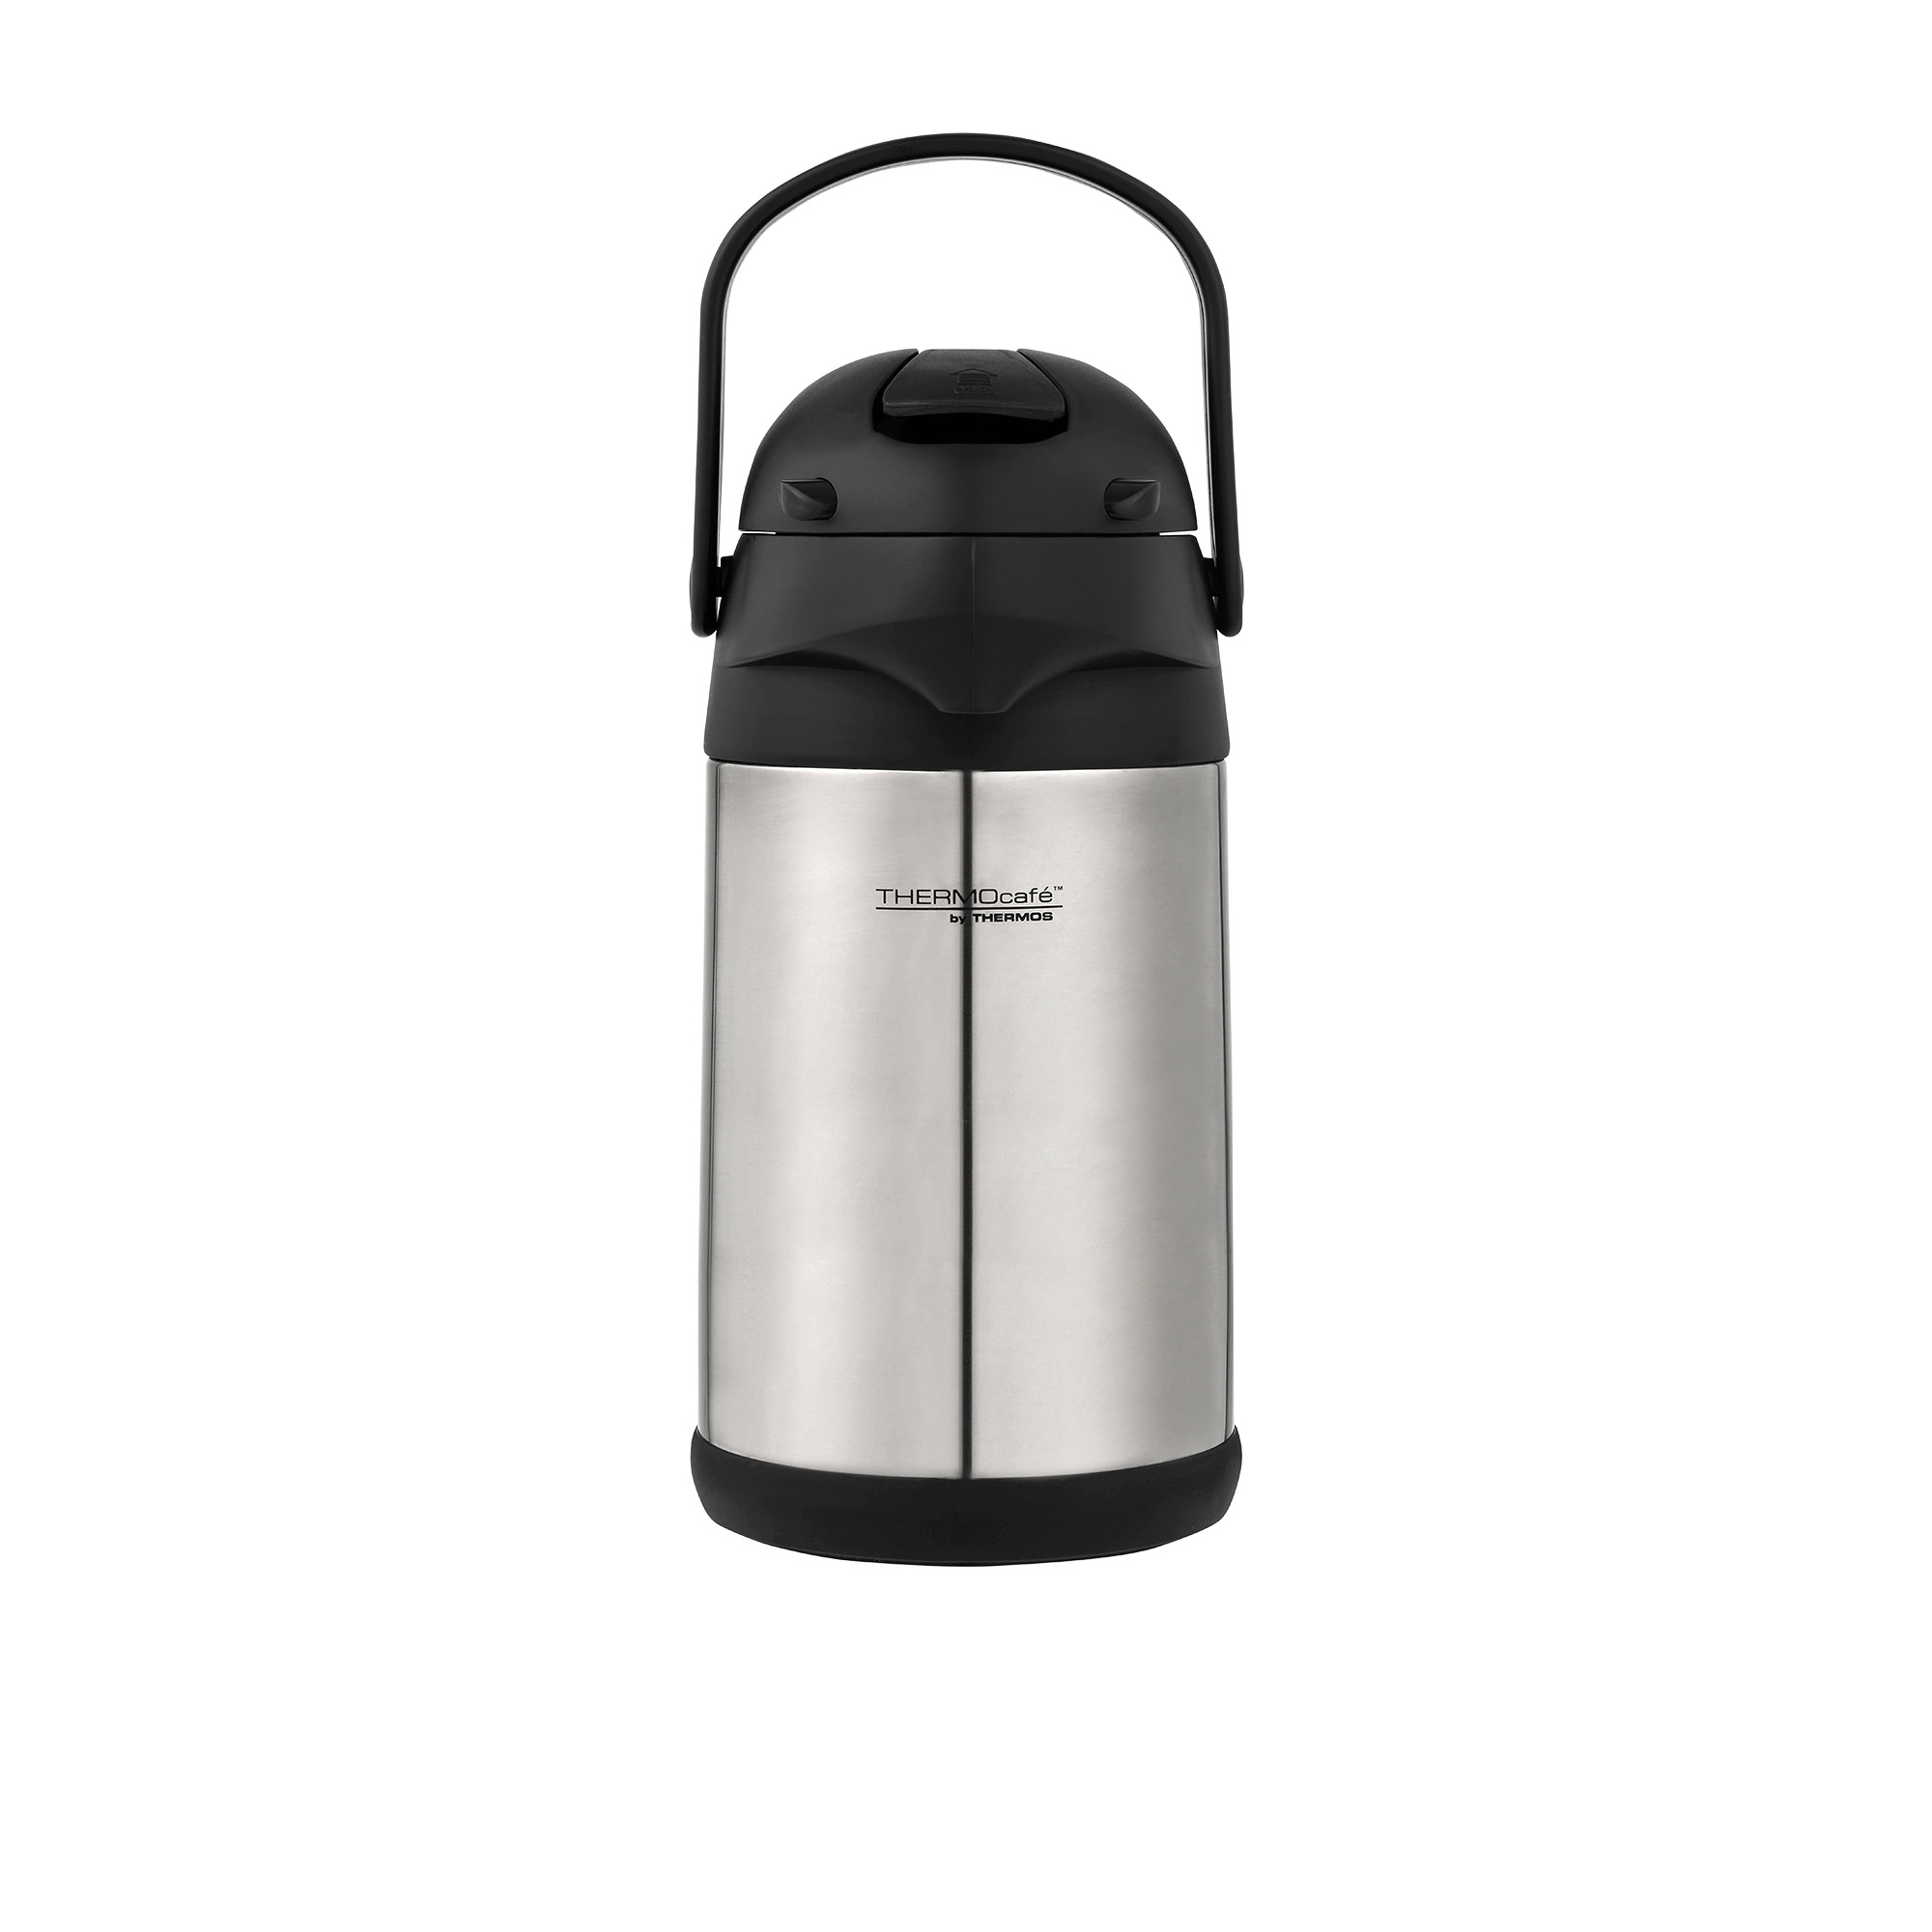 Thermos Thermocafe Insulated Pump Pot 2.5L Image 2